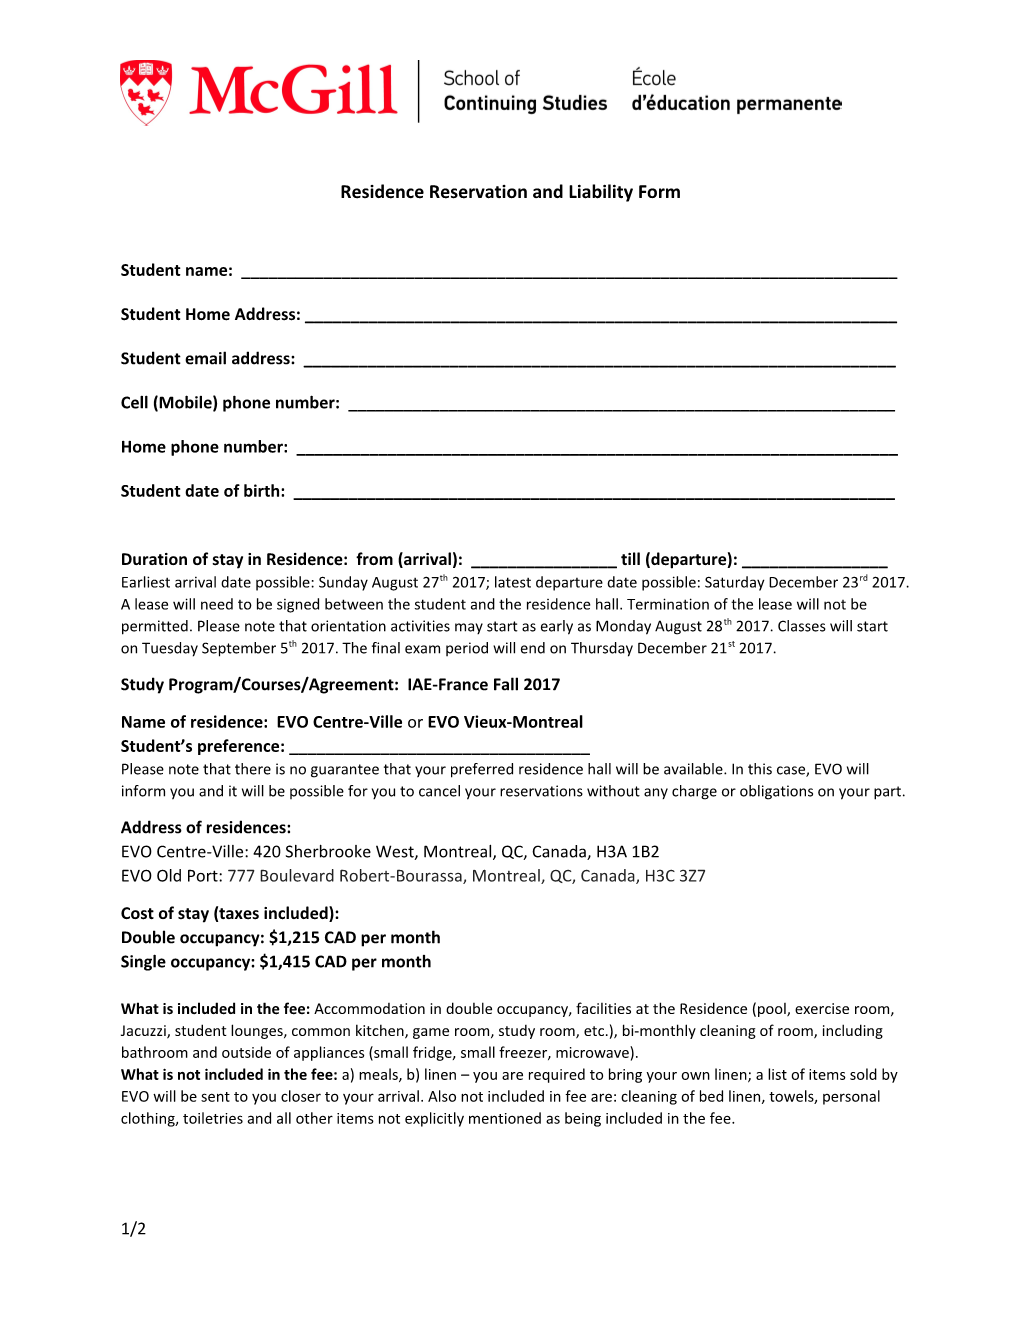 Residence Reservation and Liability Form